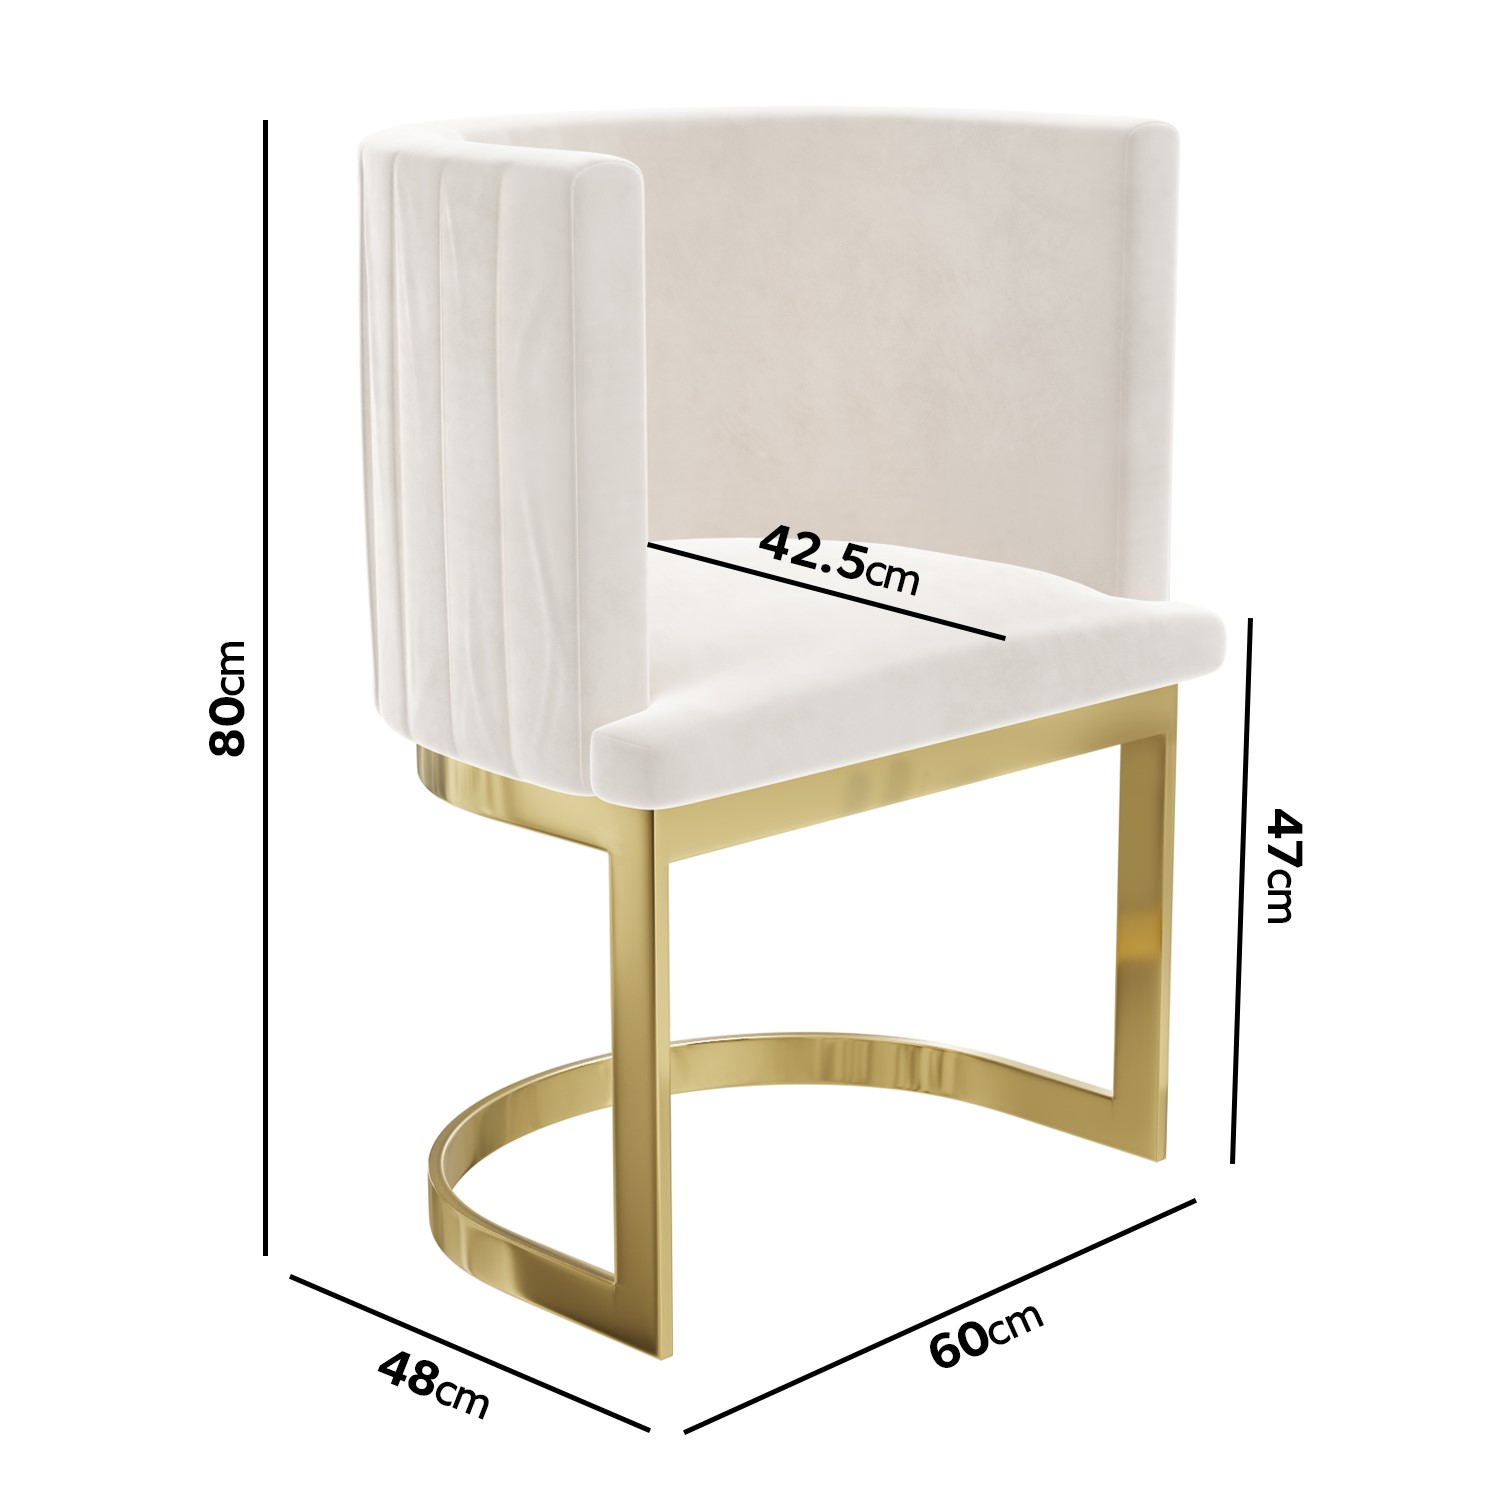 Read more about Light grey velvet cantilever dressing table chair with gold legs zelena